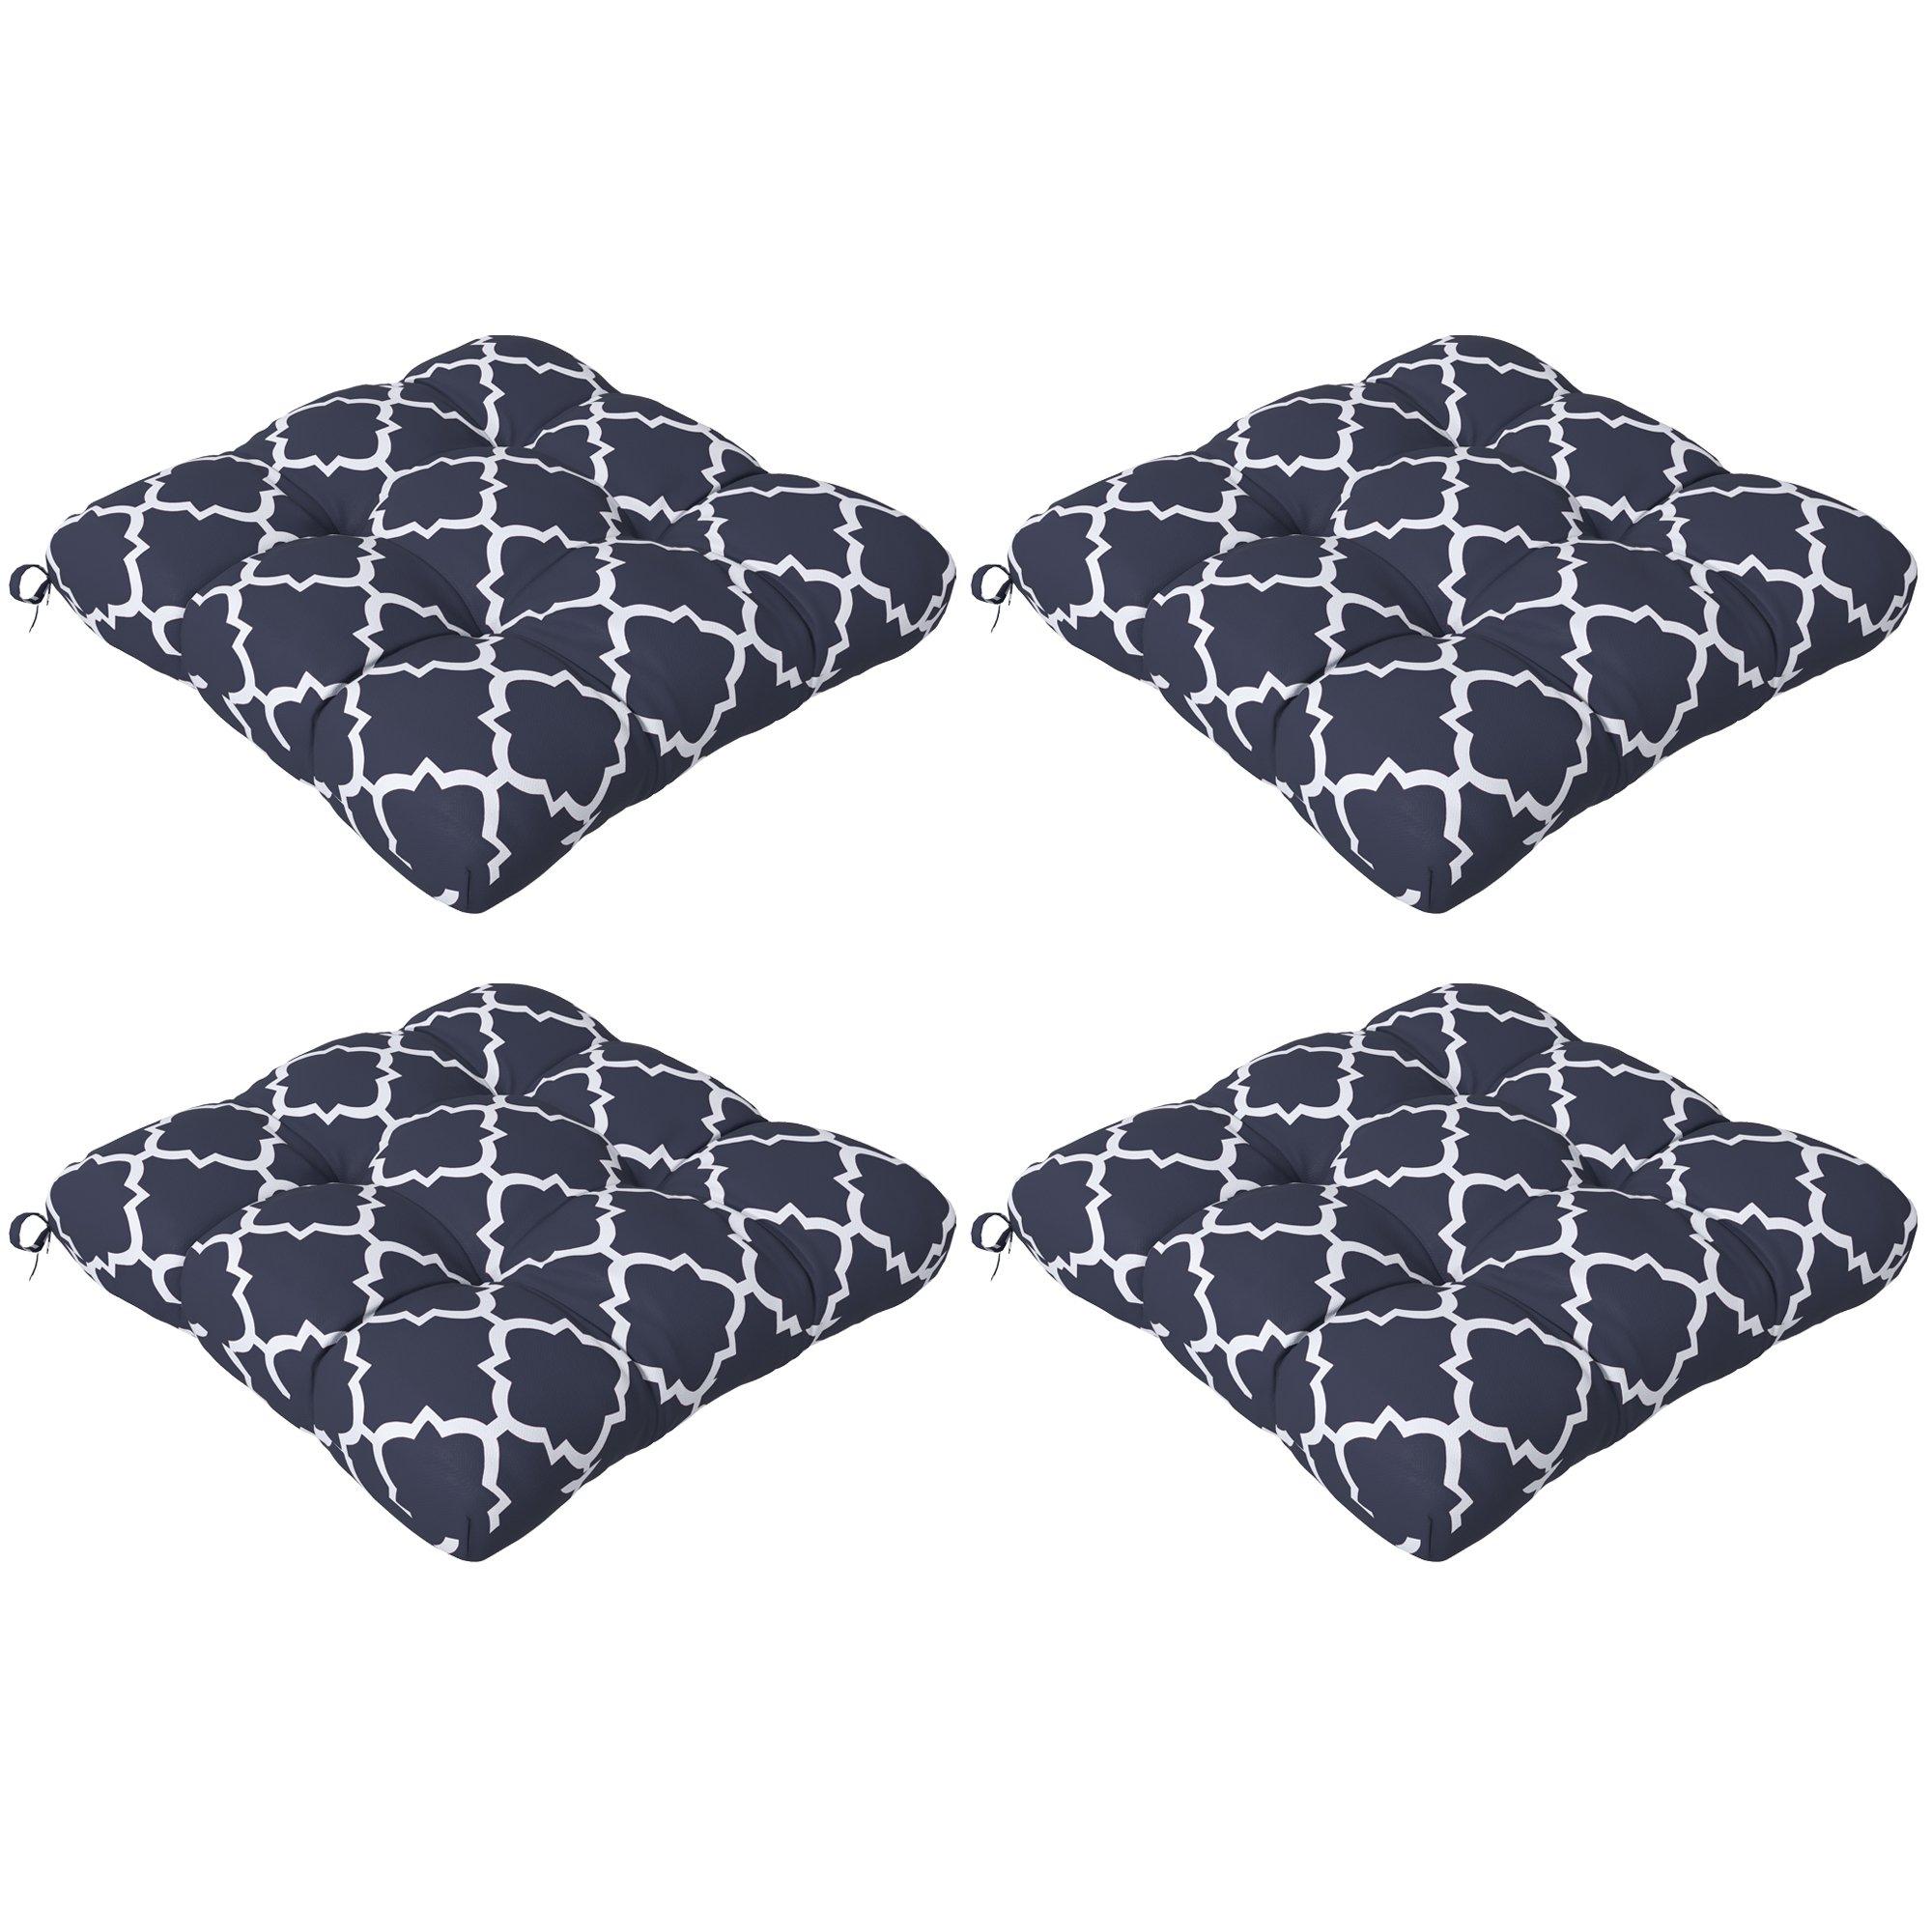 Set of 4 Outdoor Seat Cushion with Ties, for Garden Furniture